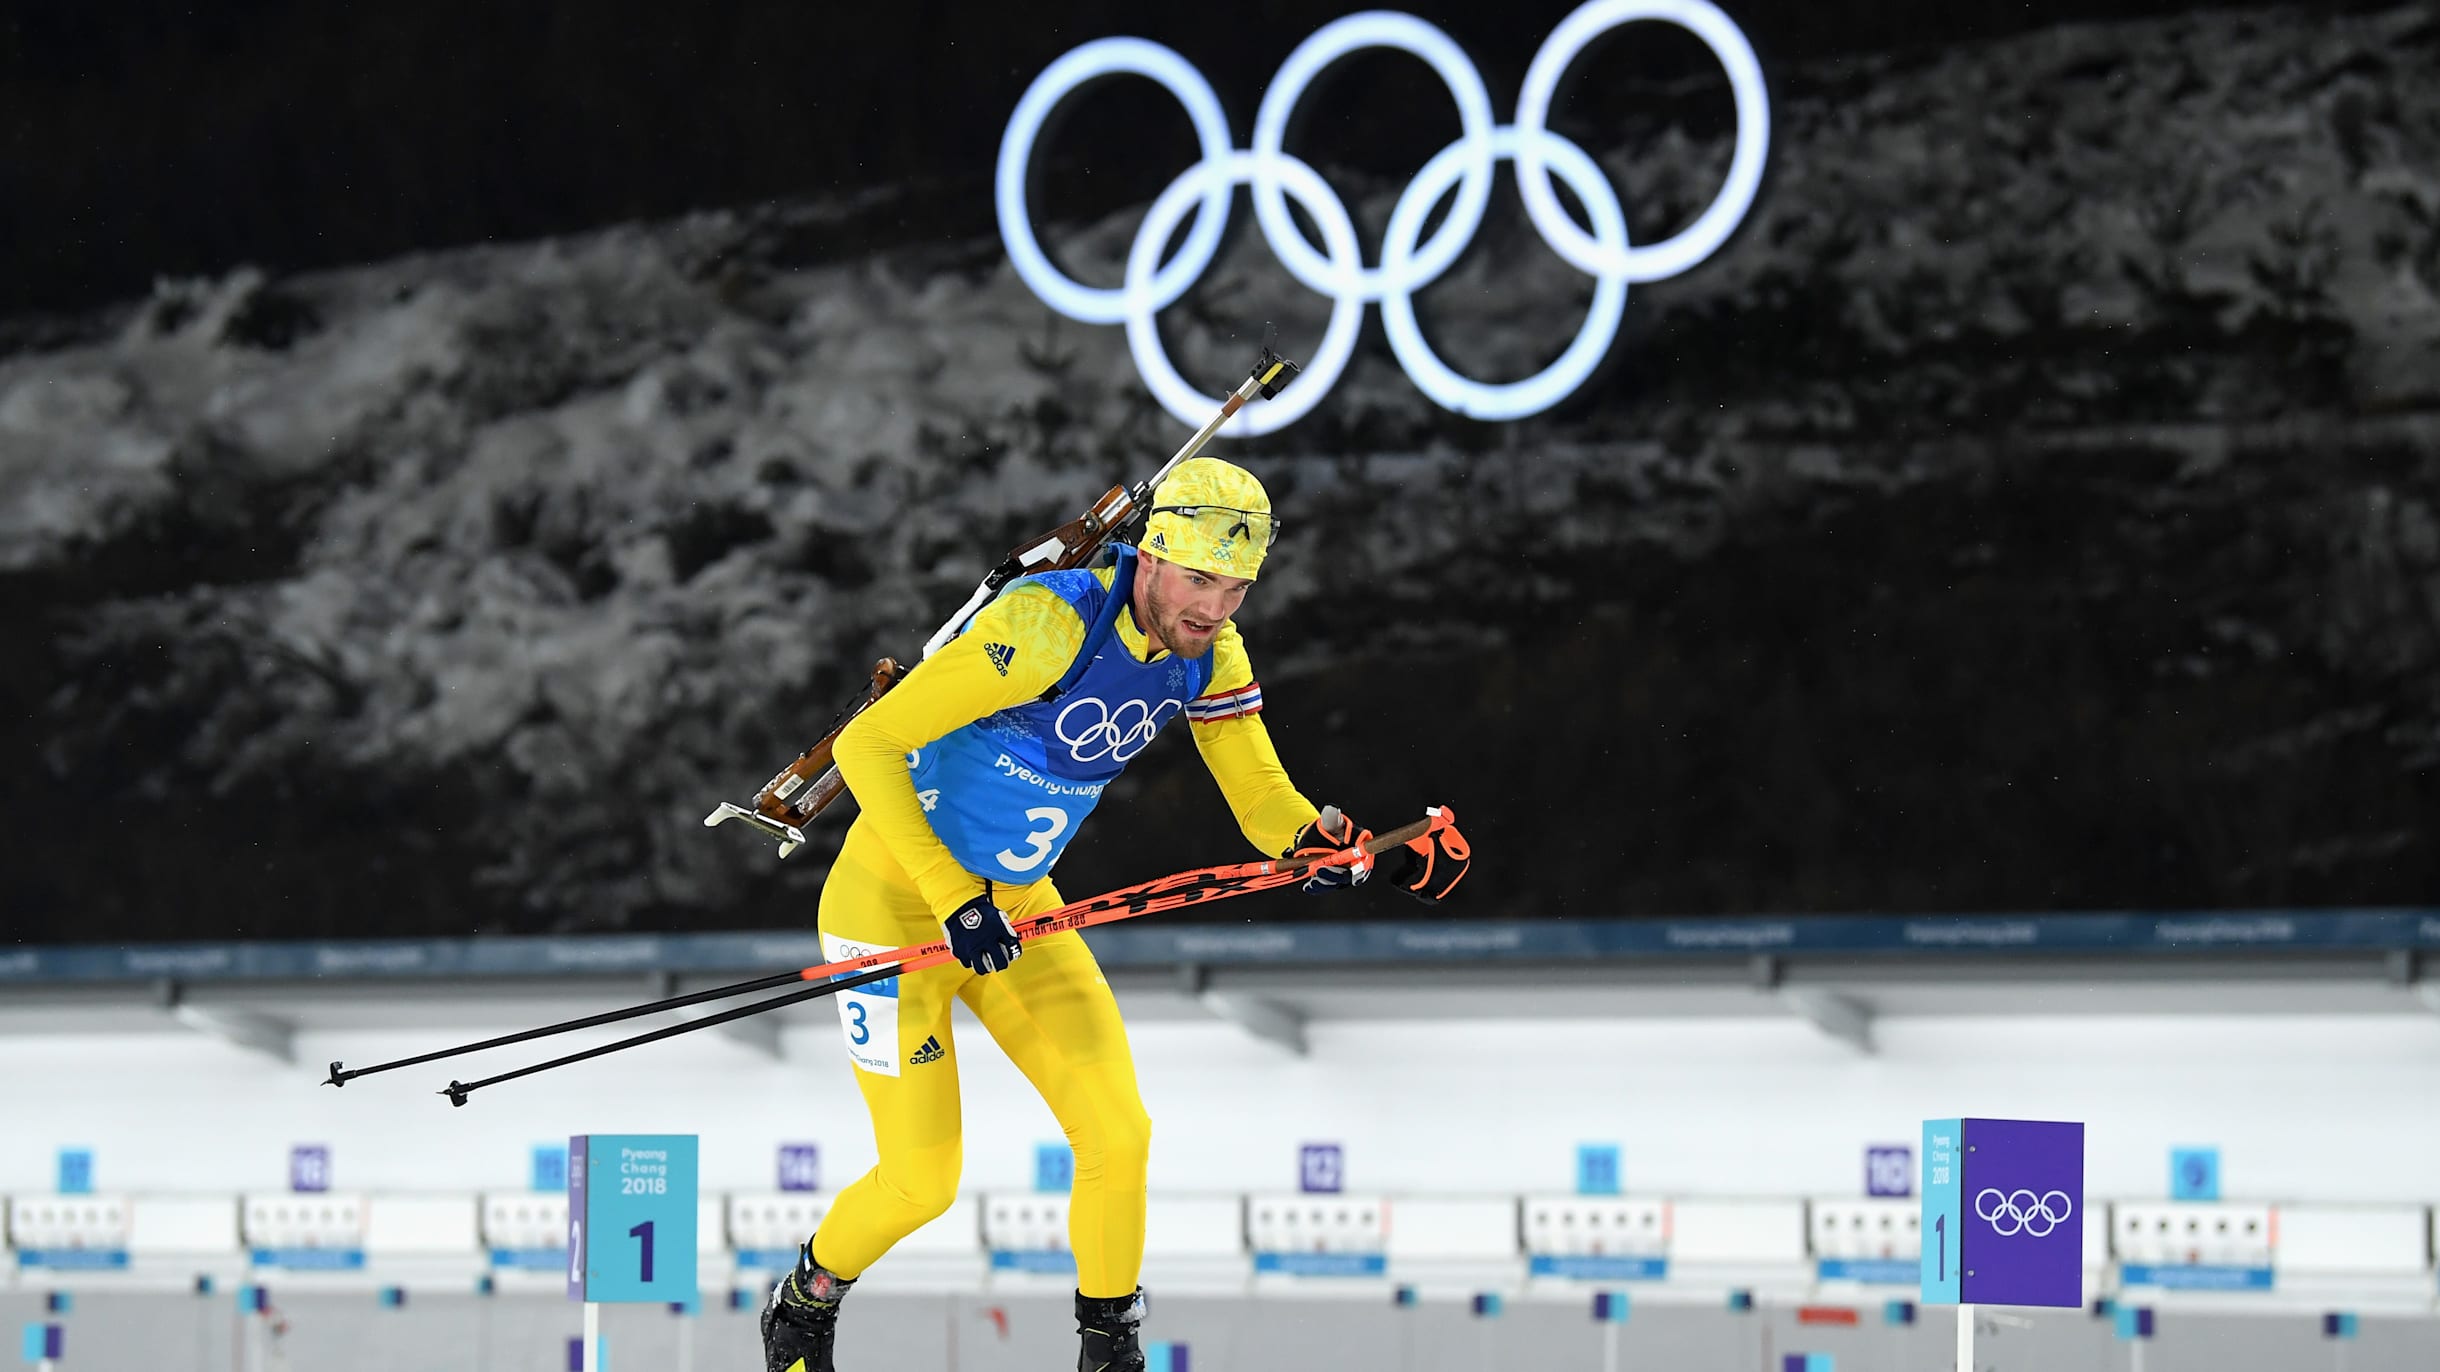 What are the differences between the biathlon disciplines?